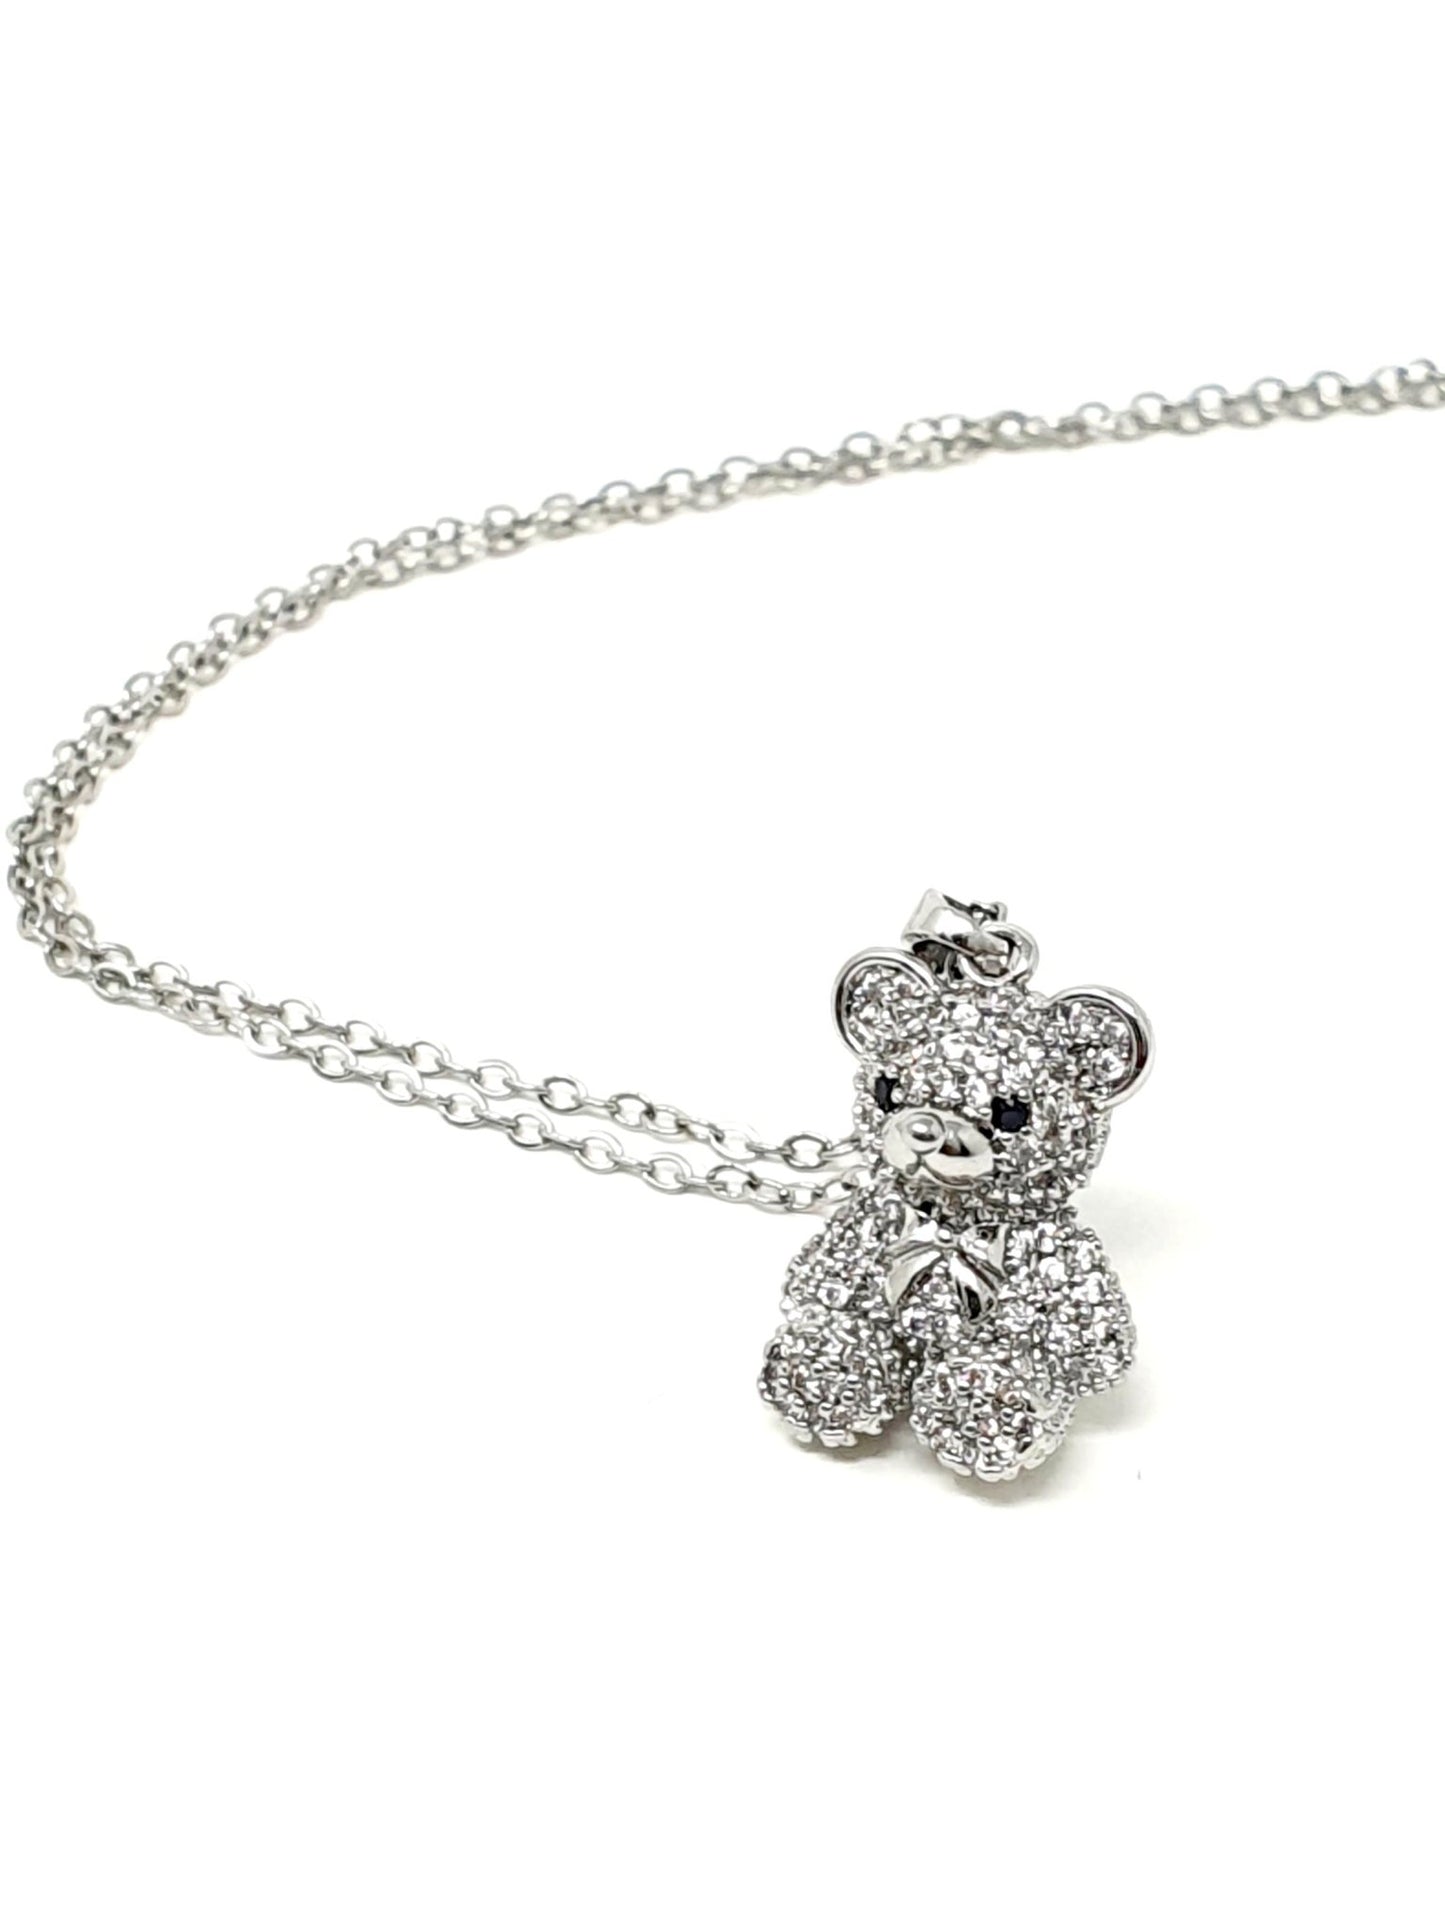 Collana "Teddy" Silver LIMITED EDITION - 333HOPE333